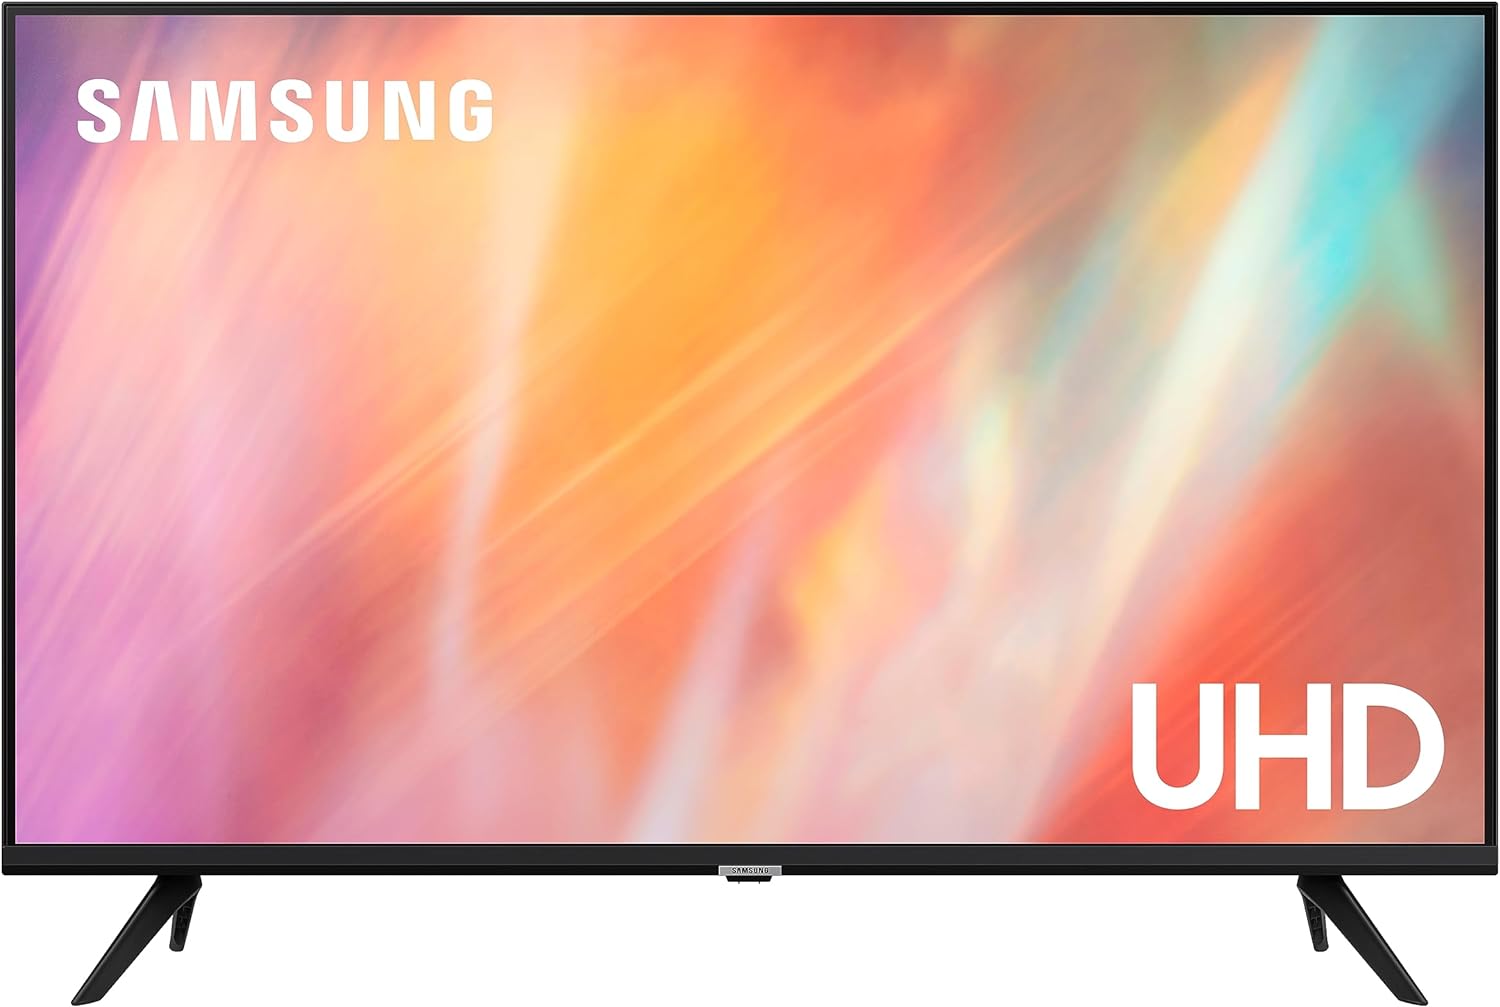 Samsung 43 Inch AU7020 UHD HDR 4K Smart TV (2023) - Crystal UHD 4K Smart TV With HDR Picture, Adaptive Sound Lite, PurColour Colour Technology & Q - Symphony Sound - Compatible With Alexa   Import  Single ASIN  Import  Multiple ASIN ×Product custom - Amazing Gadgets Outlet